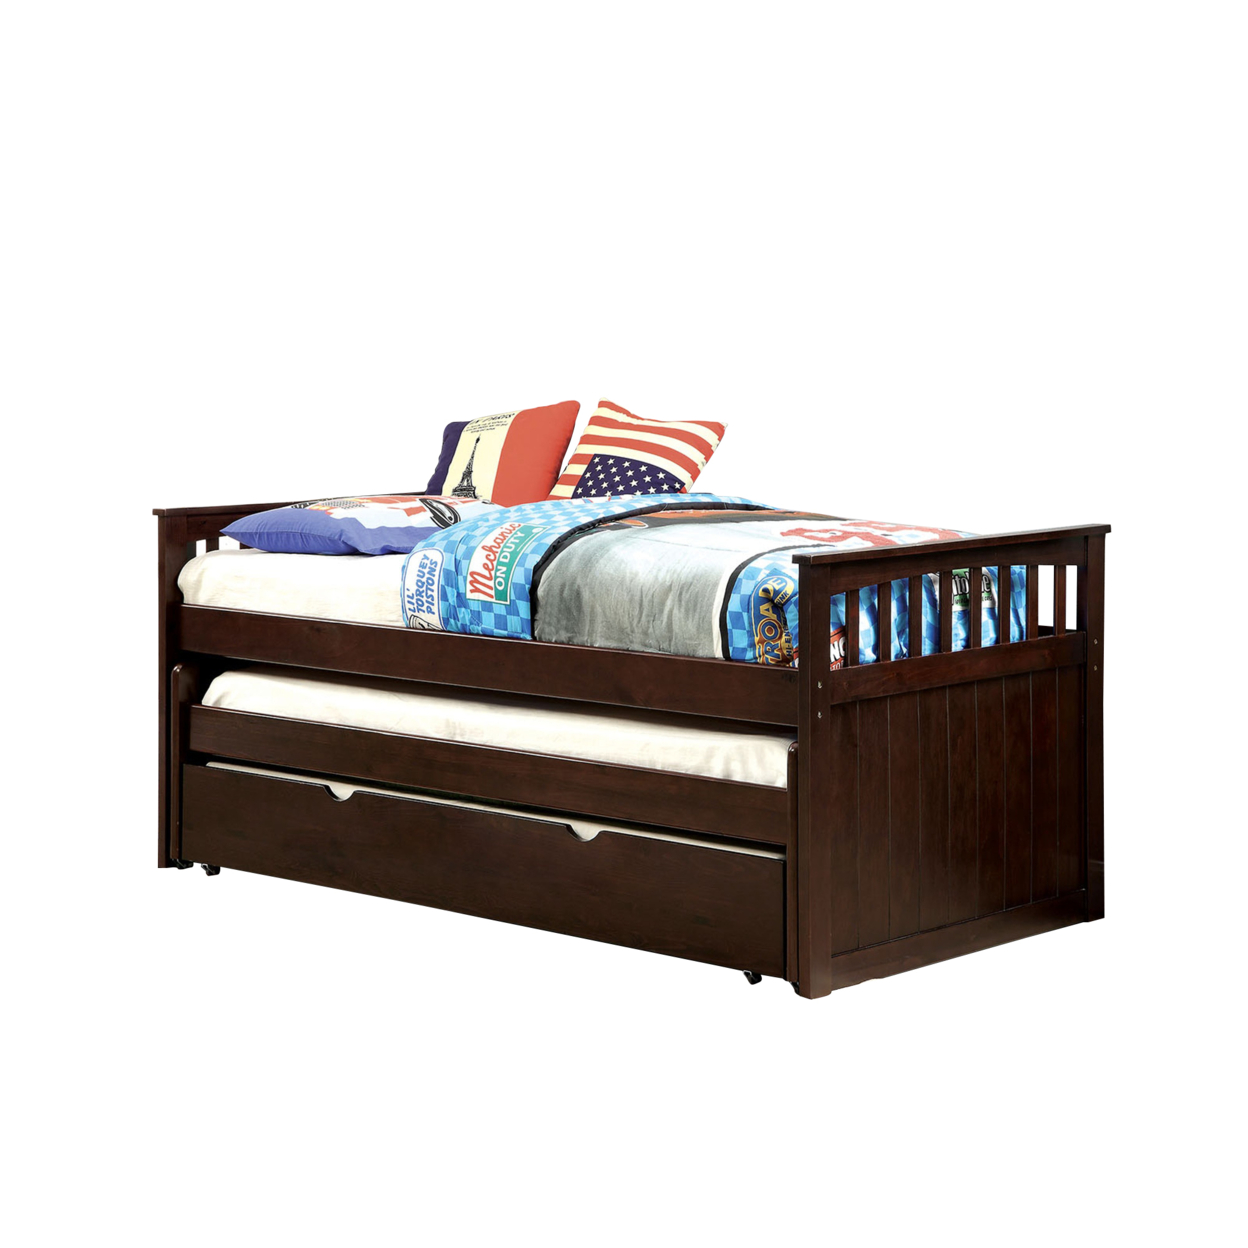 Mission Style Wooden Daybed With Slatted Design, Espresso Brown- Saltoro Sherpi